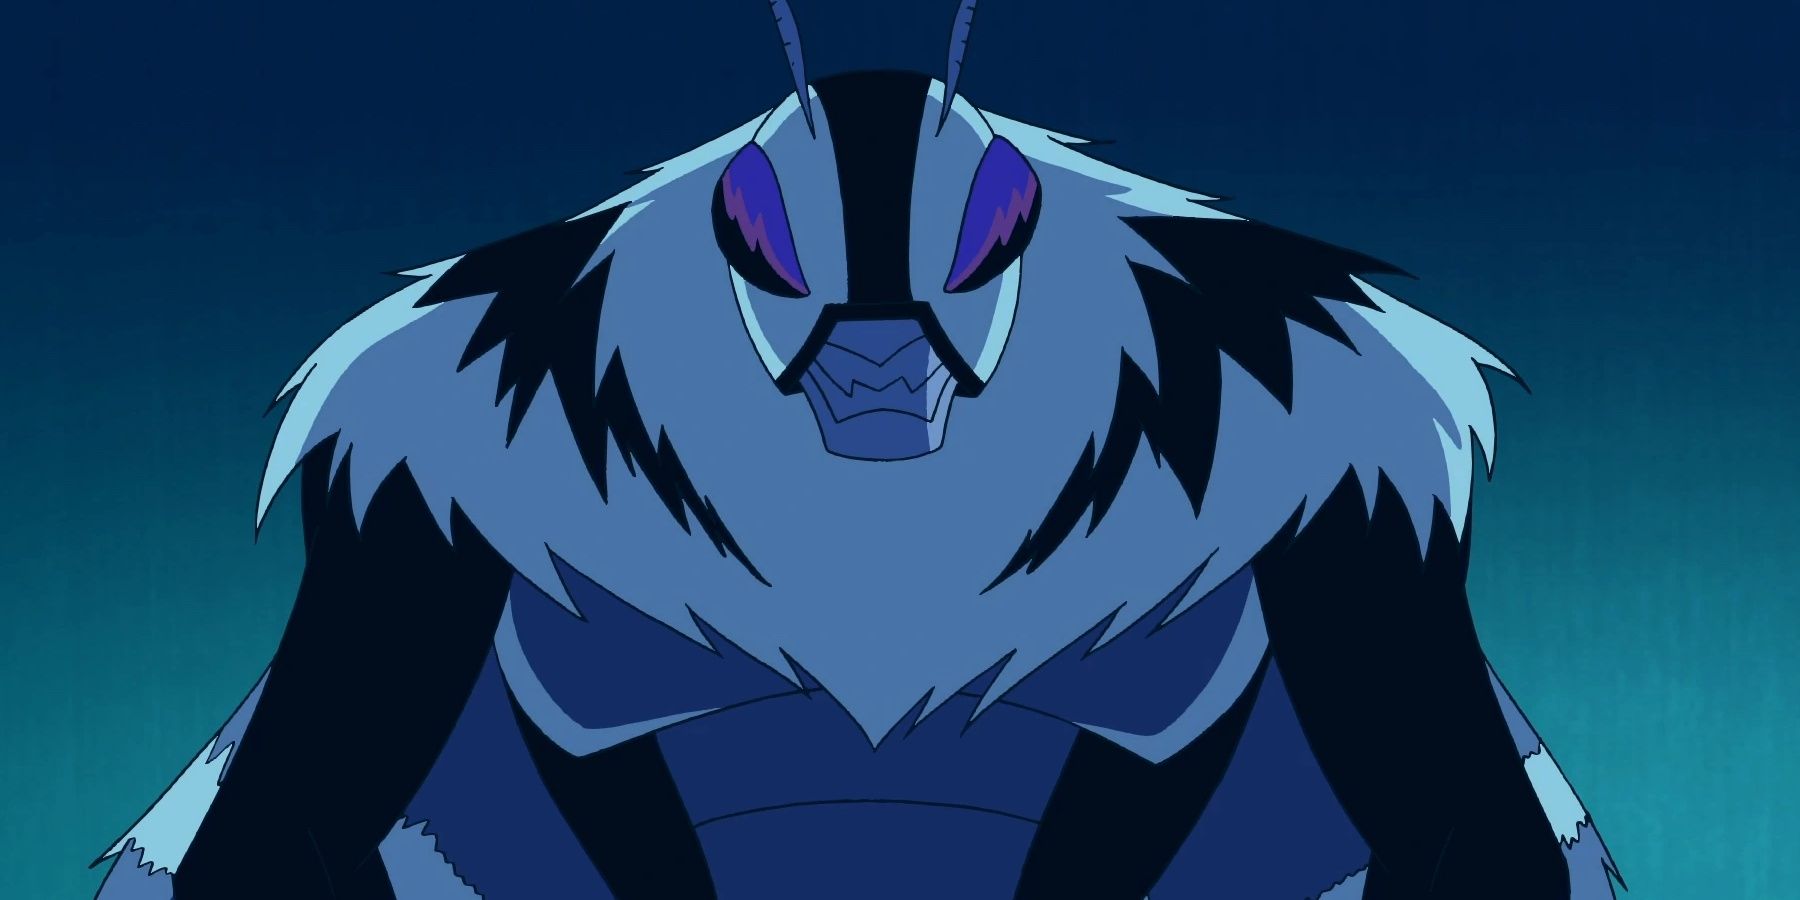 teen-titans-killer-moth-featured-image Cropped